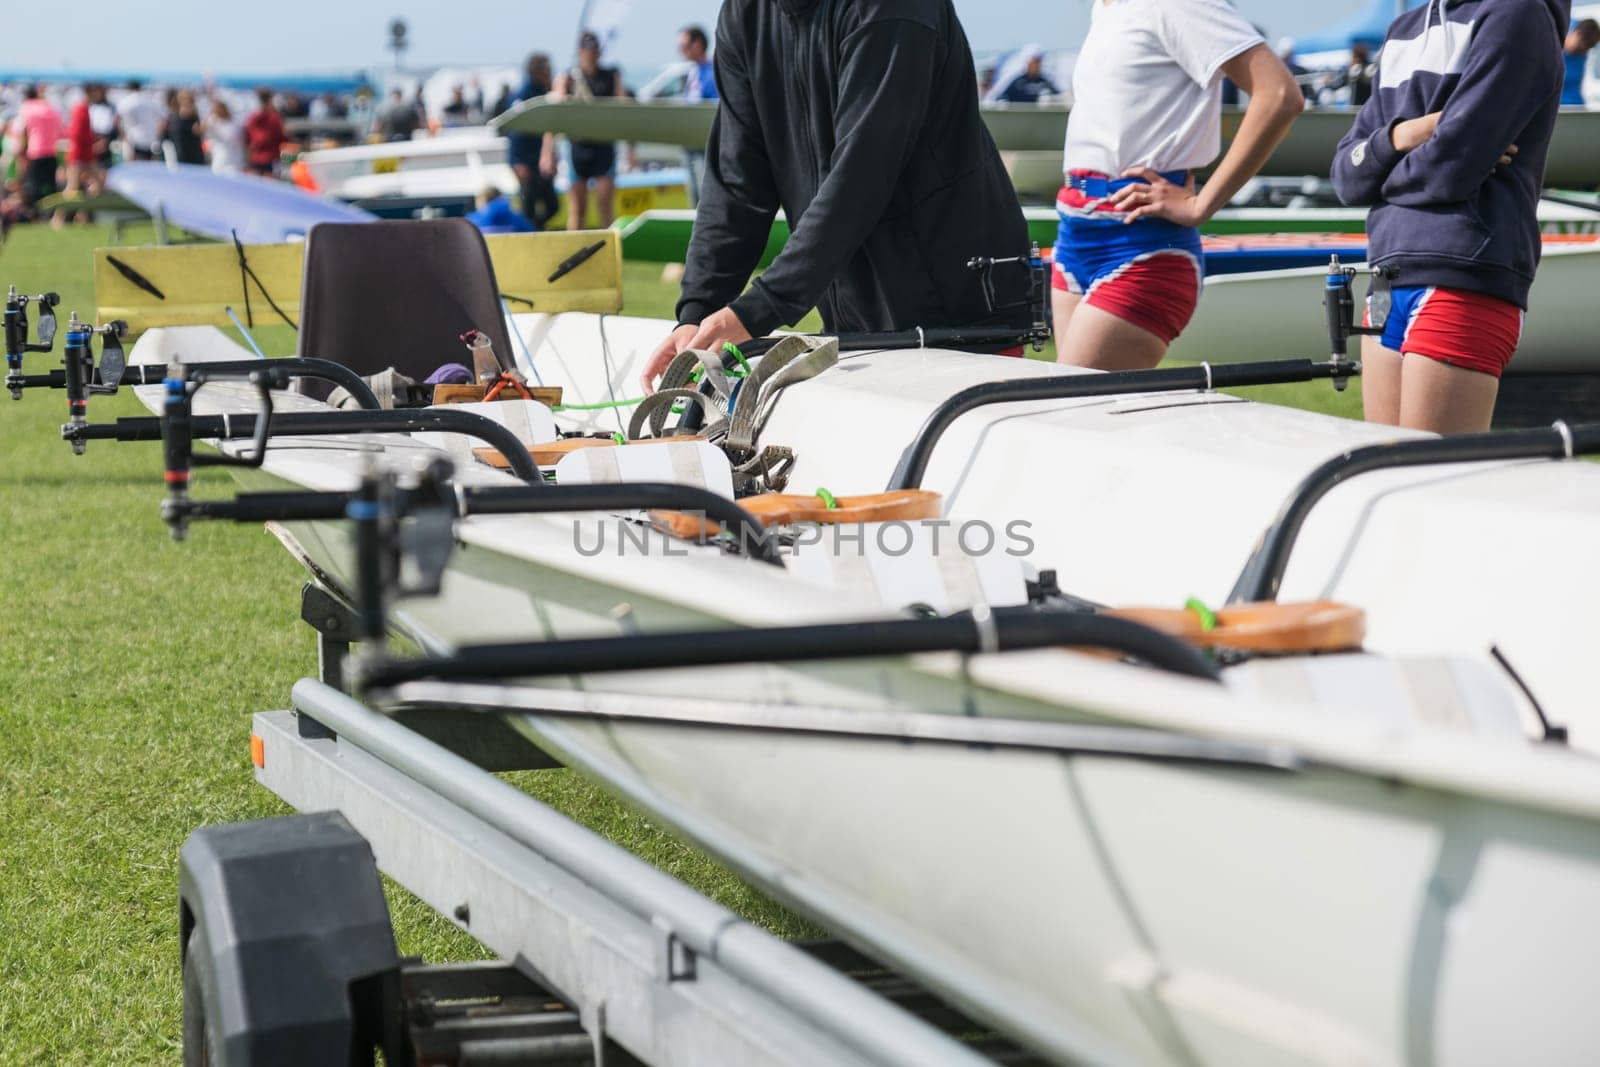 French Rowing Championship. Water Rowing boats by Godi